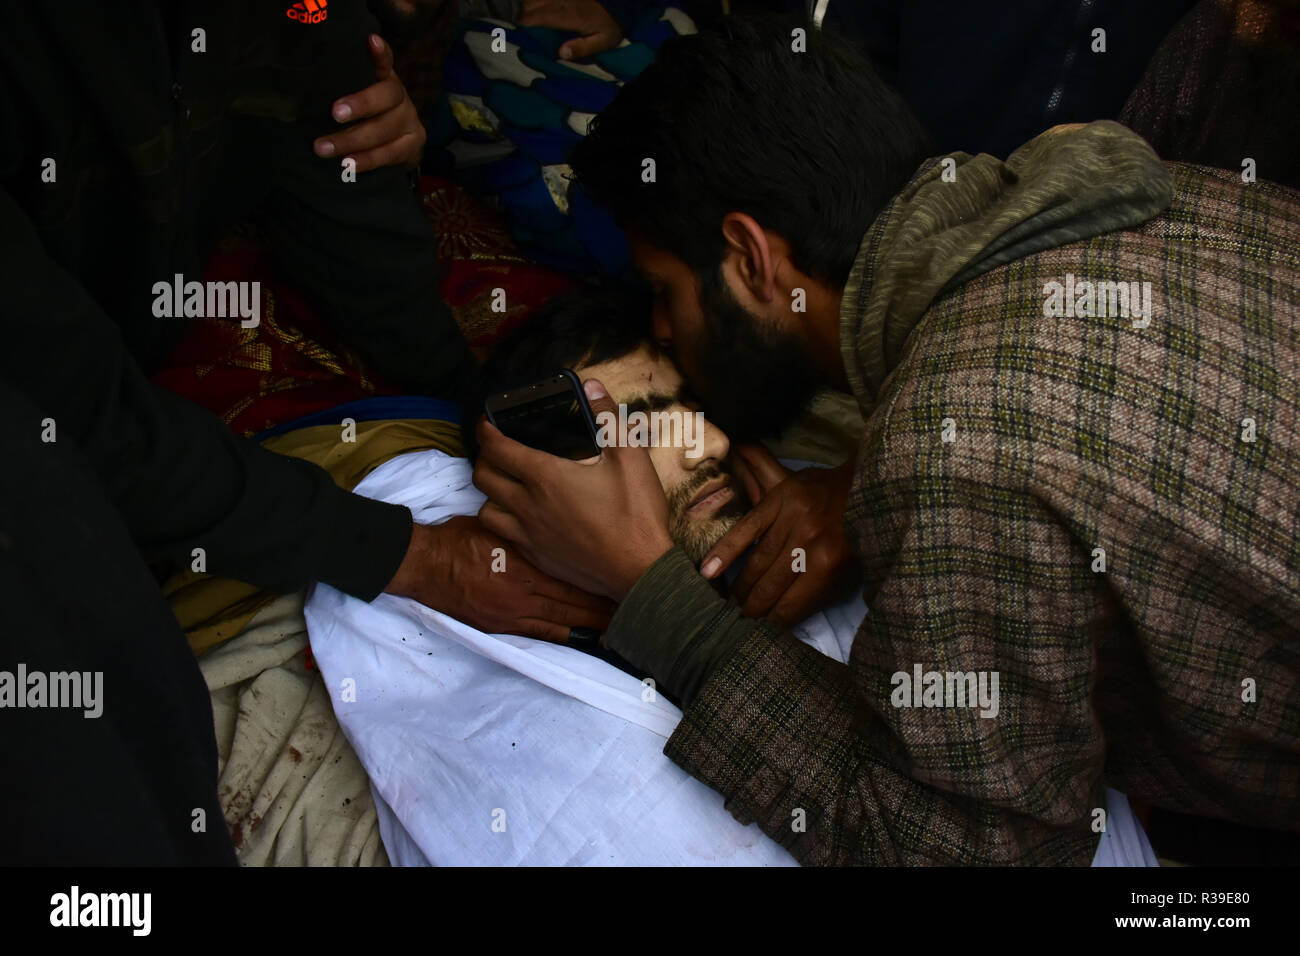 November 20, 2018 - Kashmiri Muslims attend the funeral of rebel Abid Chopan who was killed during a confrontation with Indian forces in the Shopian district of Indian administered Kashmir on 20 November 2018. Chopan is one of four rebels killed in a gunfight between Indian forces and Kashmiri rebels who were identified as Inam ul Haq of Feripora, Abid Nazir Chopan of Paddarpora, Mehraj ud Din Najar of Drawni Zainapora and Basharat Ahmad of Chotigam. Two Indian paratroopers were also killed in the exchange of fire. A lady was also injured by a live ammunition near the gunfight site in the Shop Stock Photo